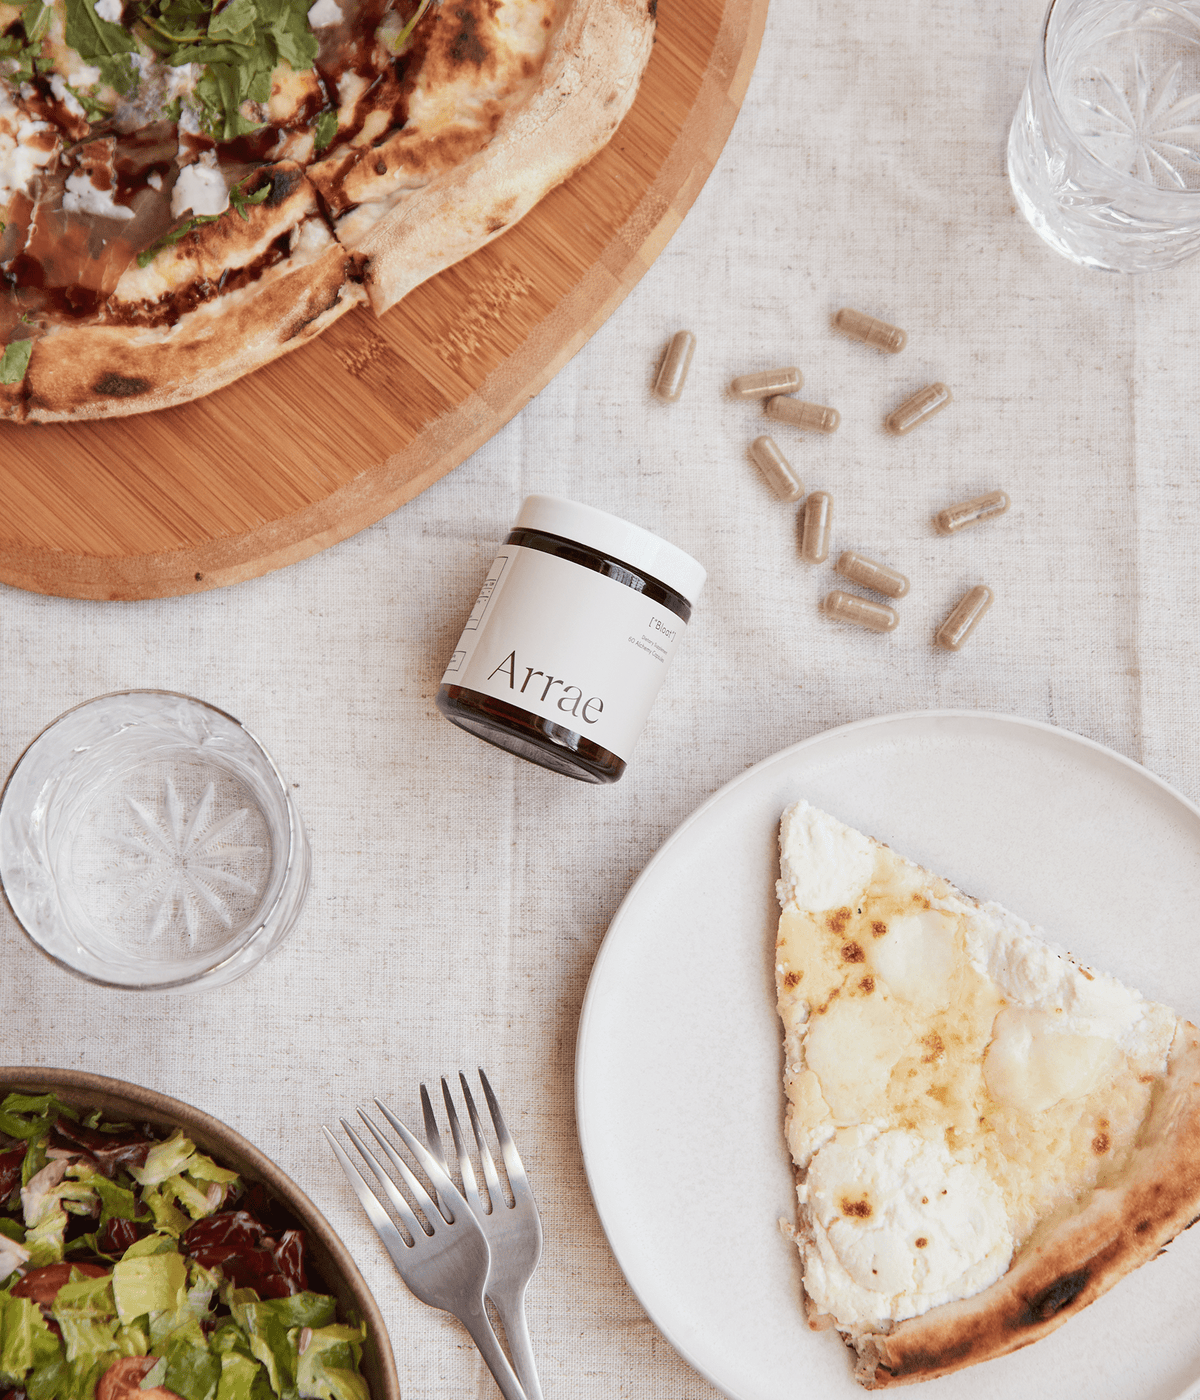 Arrae Bloat Capsules laying on the table next to pizza & salad